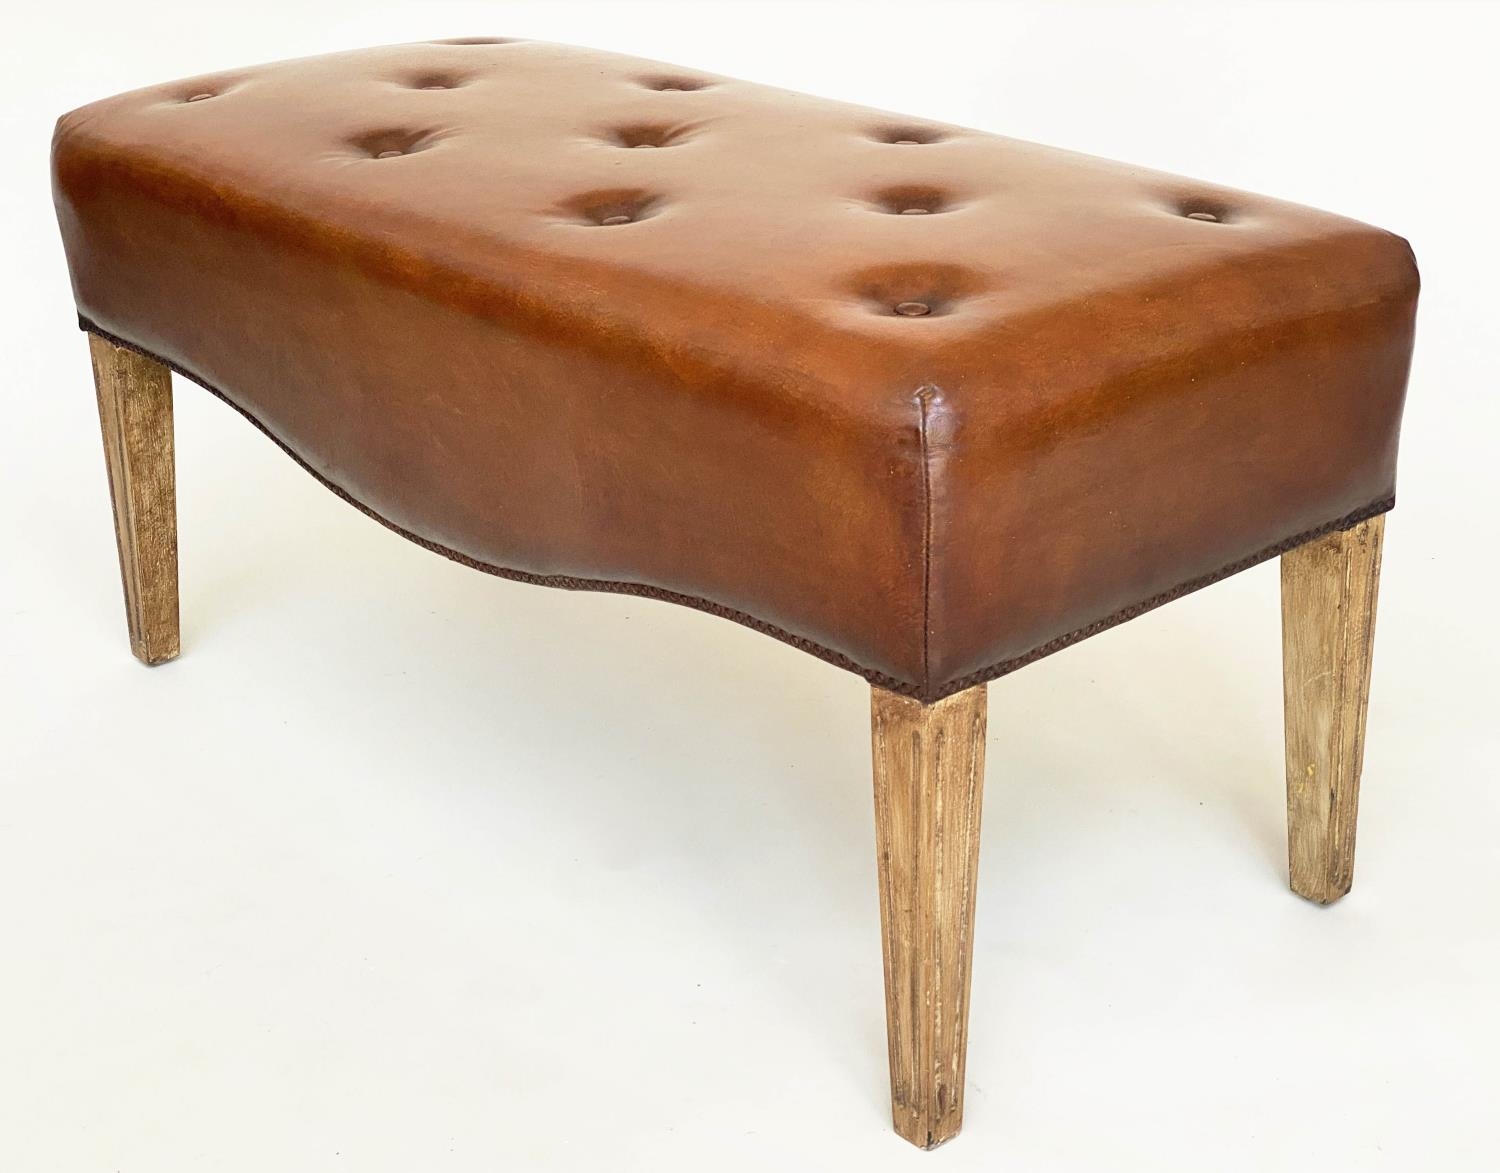 HALL BENCH, brass studded tan leather upholstered with bowed under tier, 100cm W x 45cm D x 50cm H. - Image 2 of 7